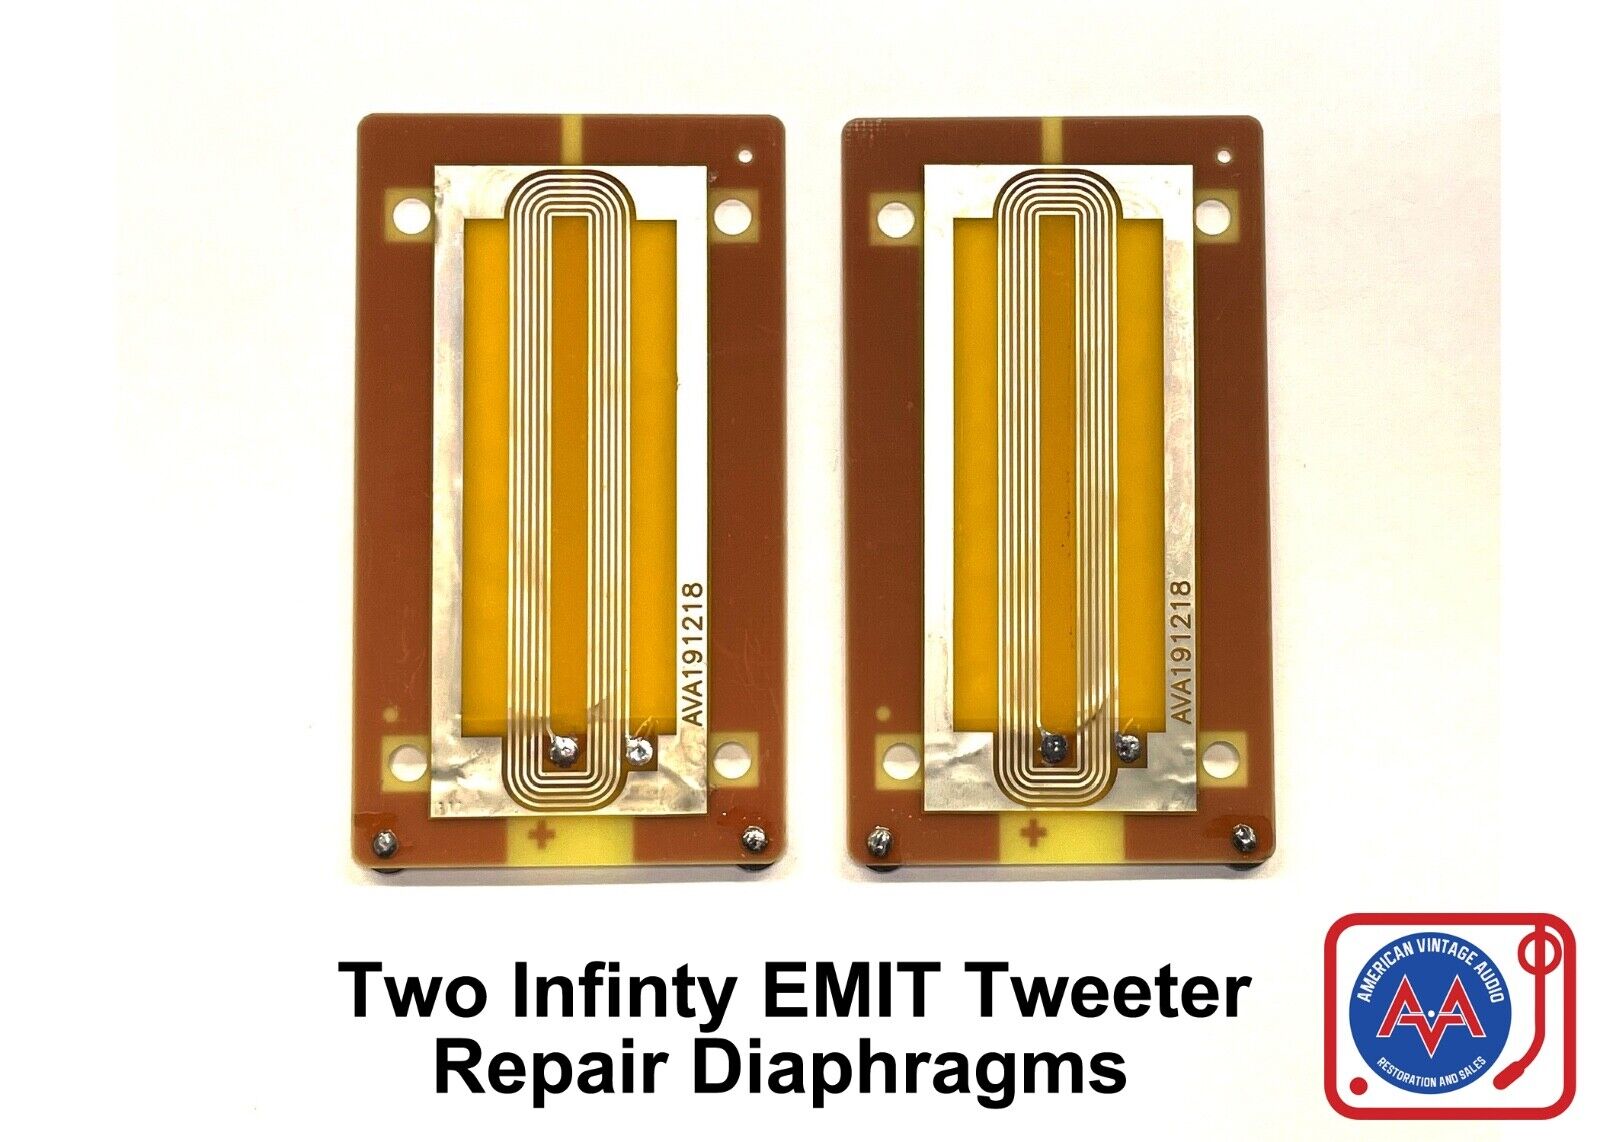 PAIR (2) Infinity EMIT Tweeter Repair Parts • TWO Pieces • NEW Revision 1.0